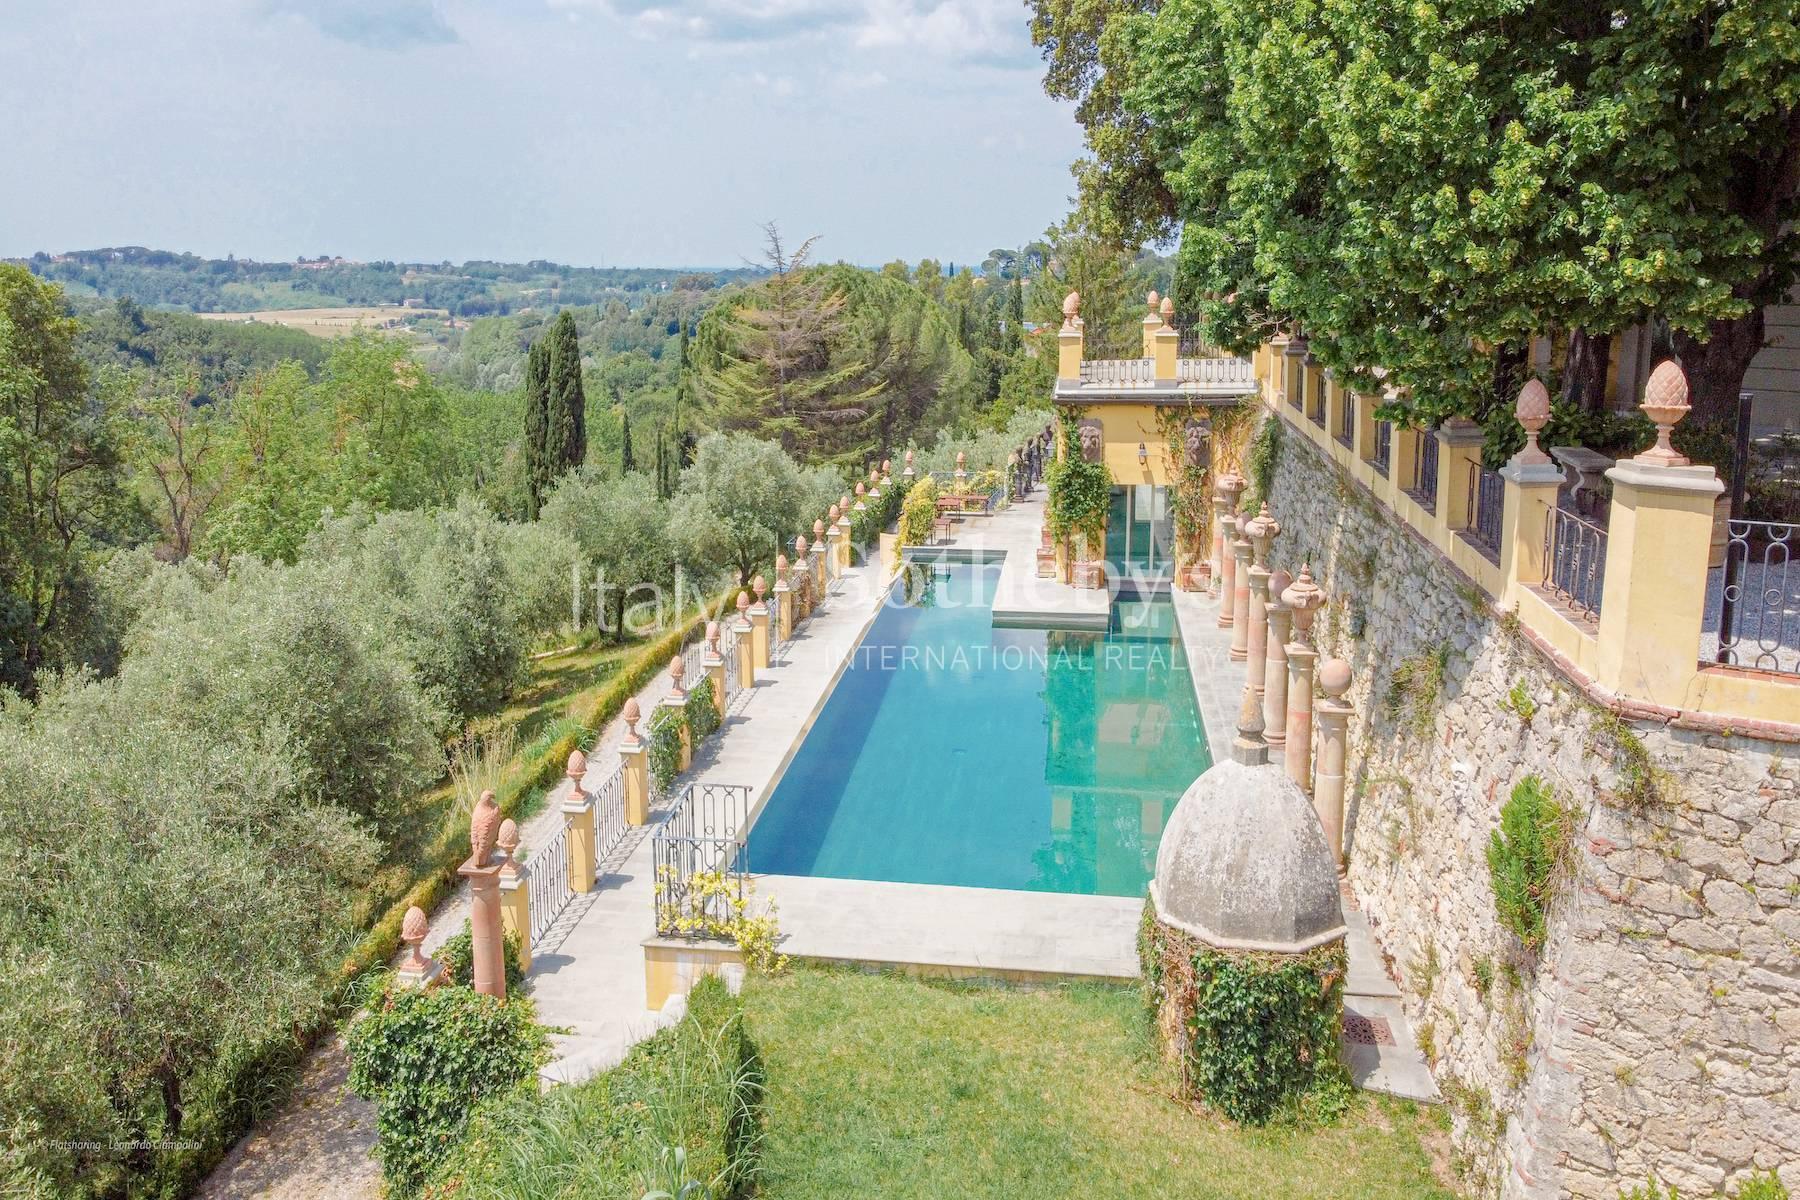 Charming Villa in the Tuscan countryside - 5